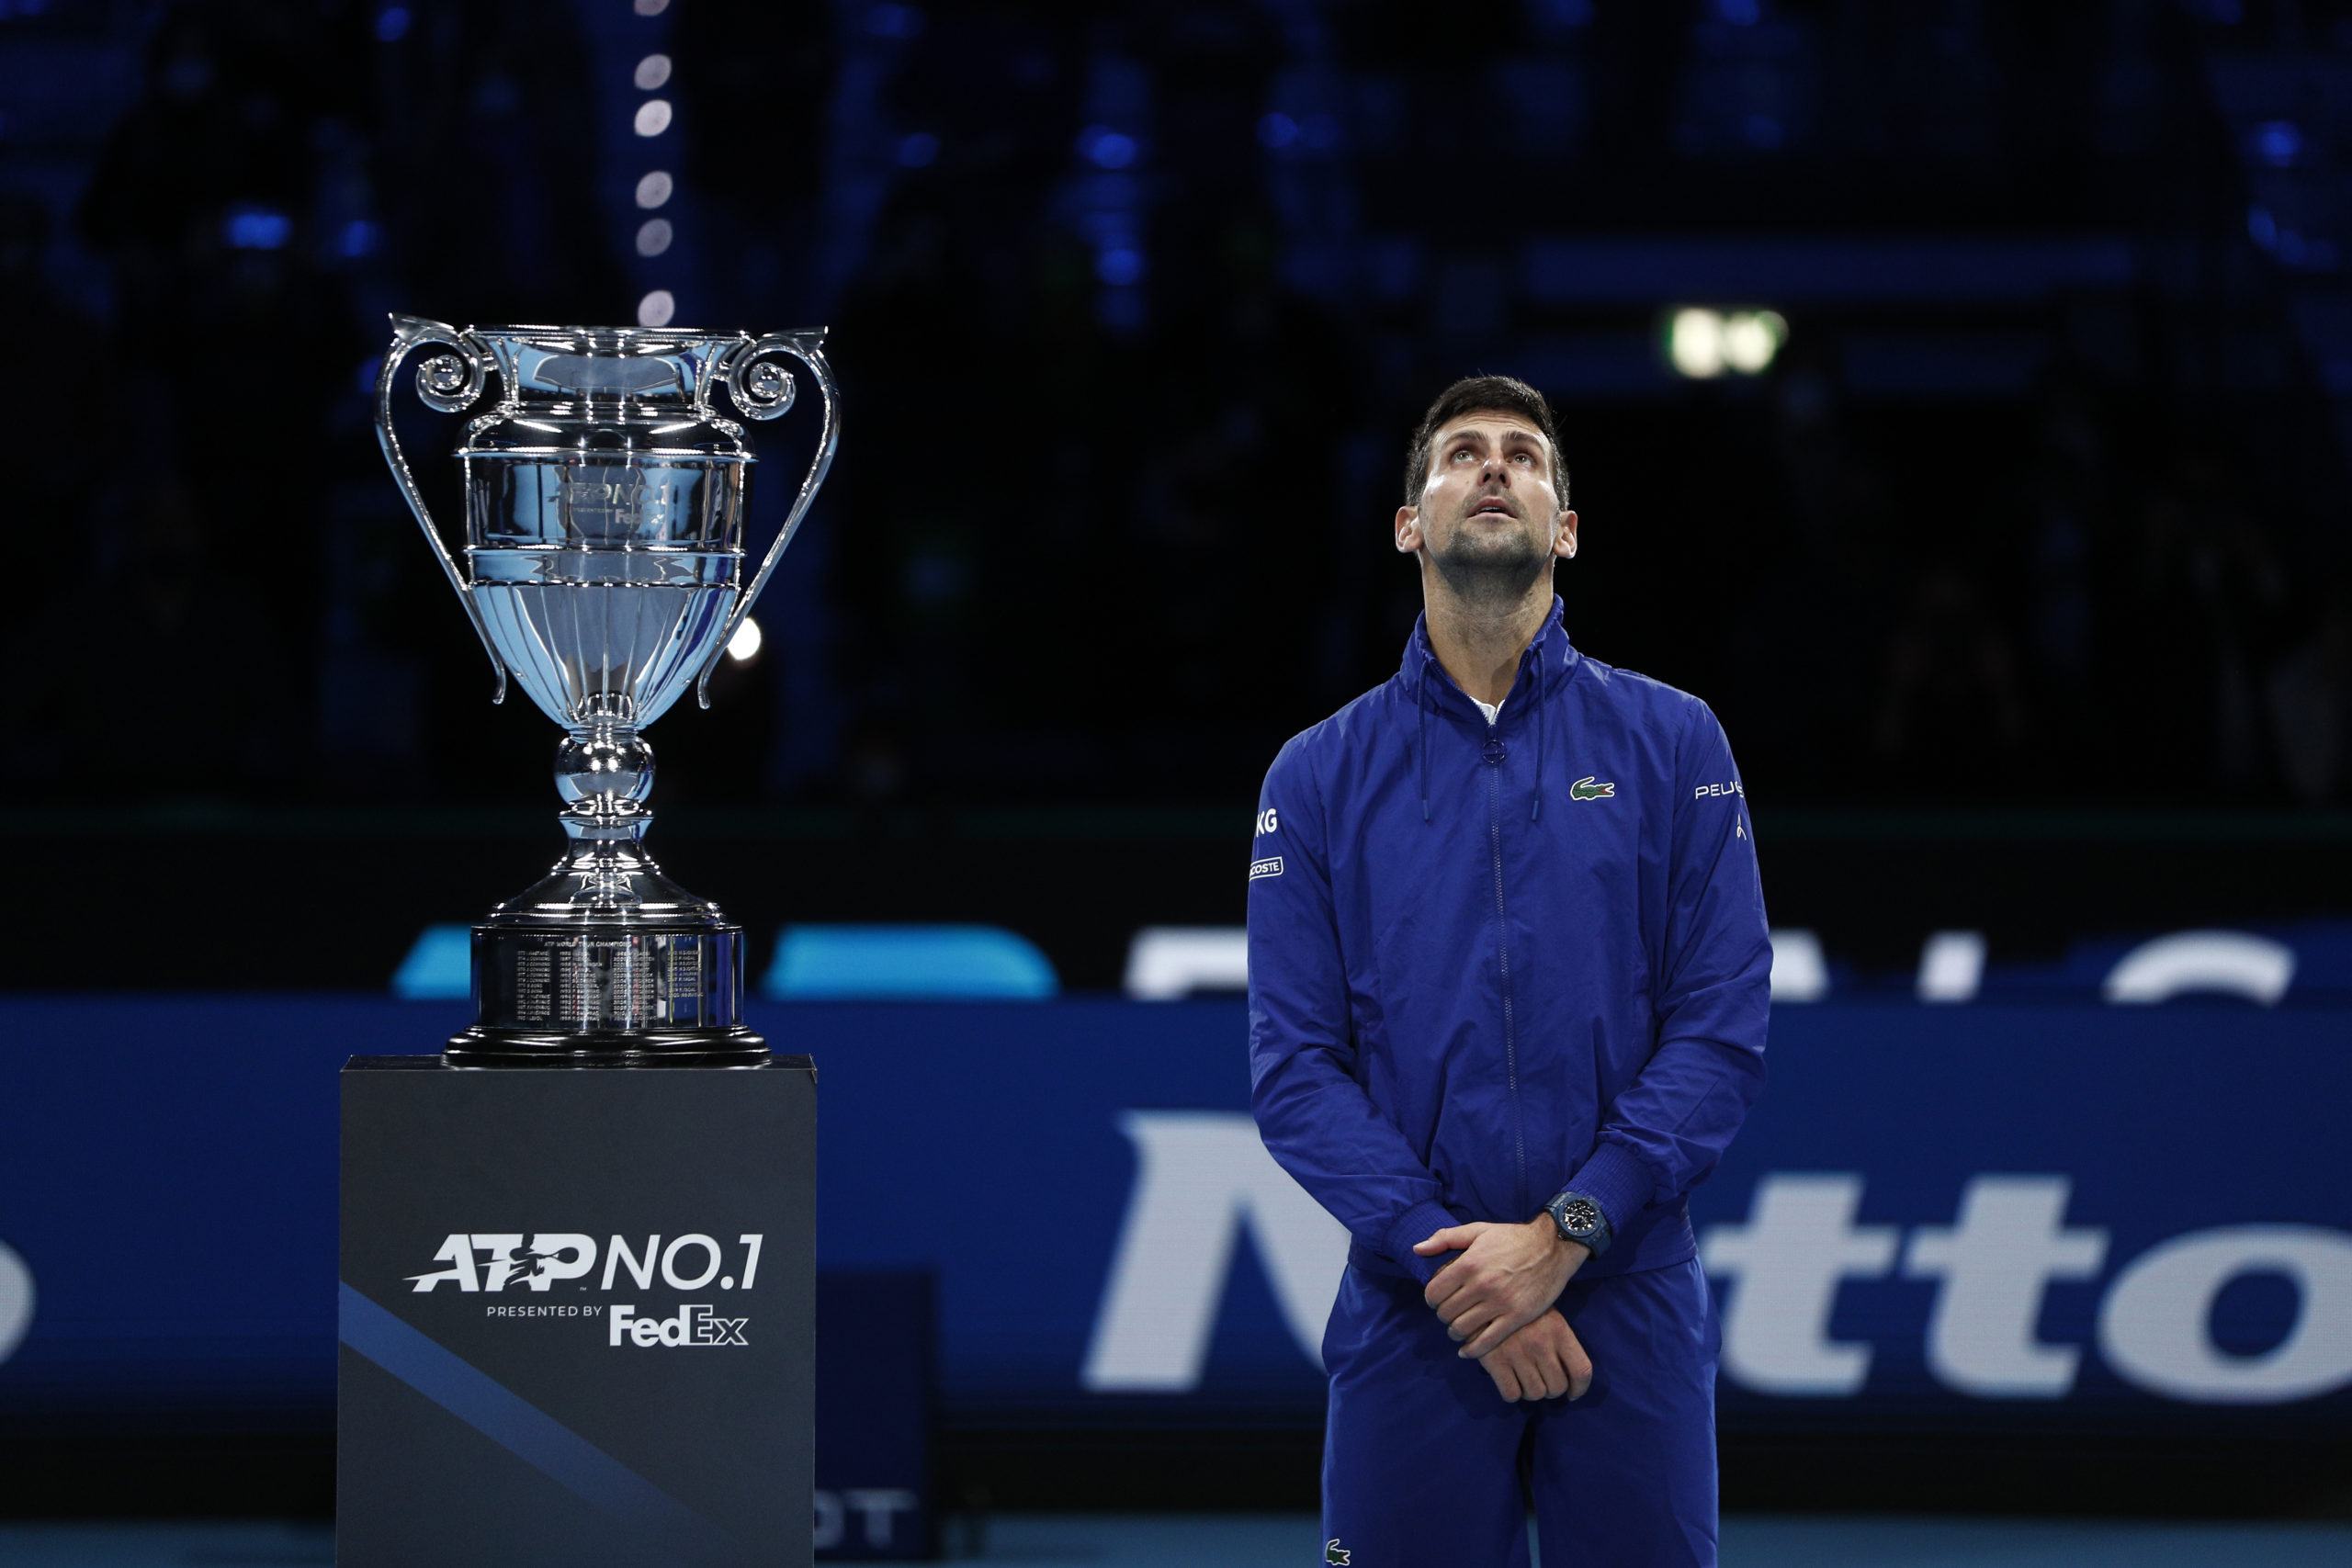 erbia's Novak Djokovic with the trophy for his 2021 world number one ranking after winning his group stage match against Norway's Casper Ruud 